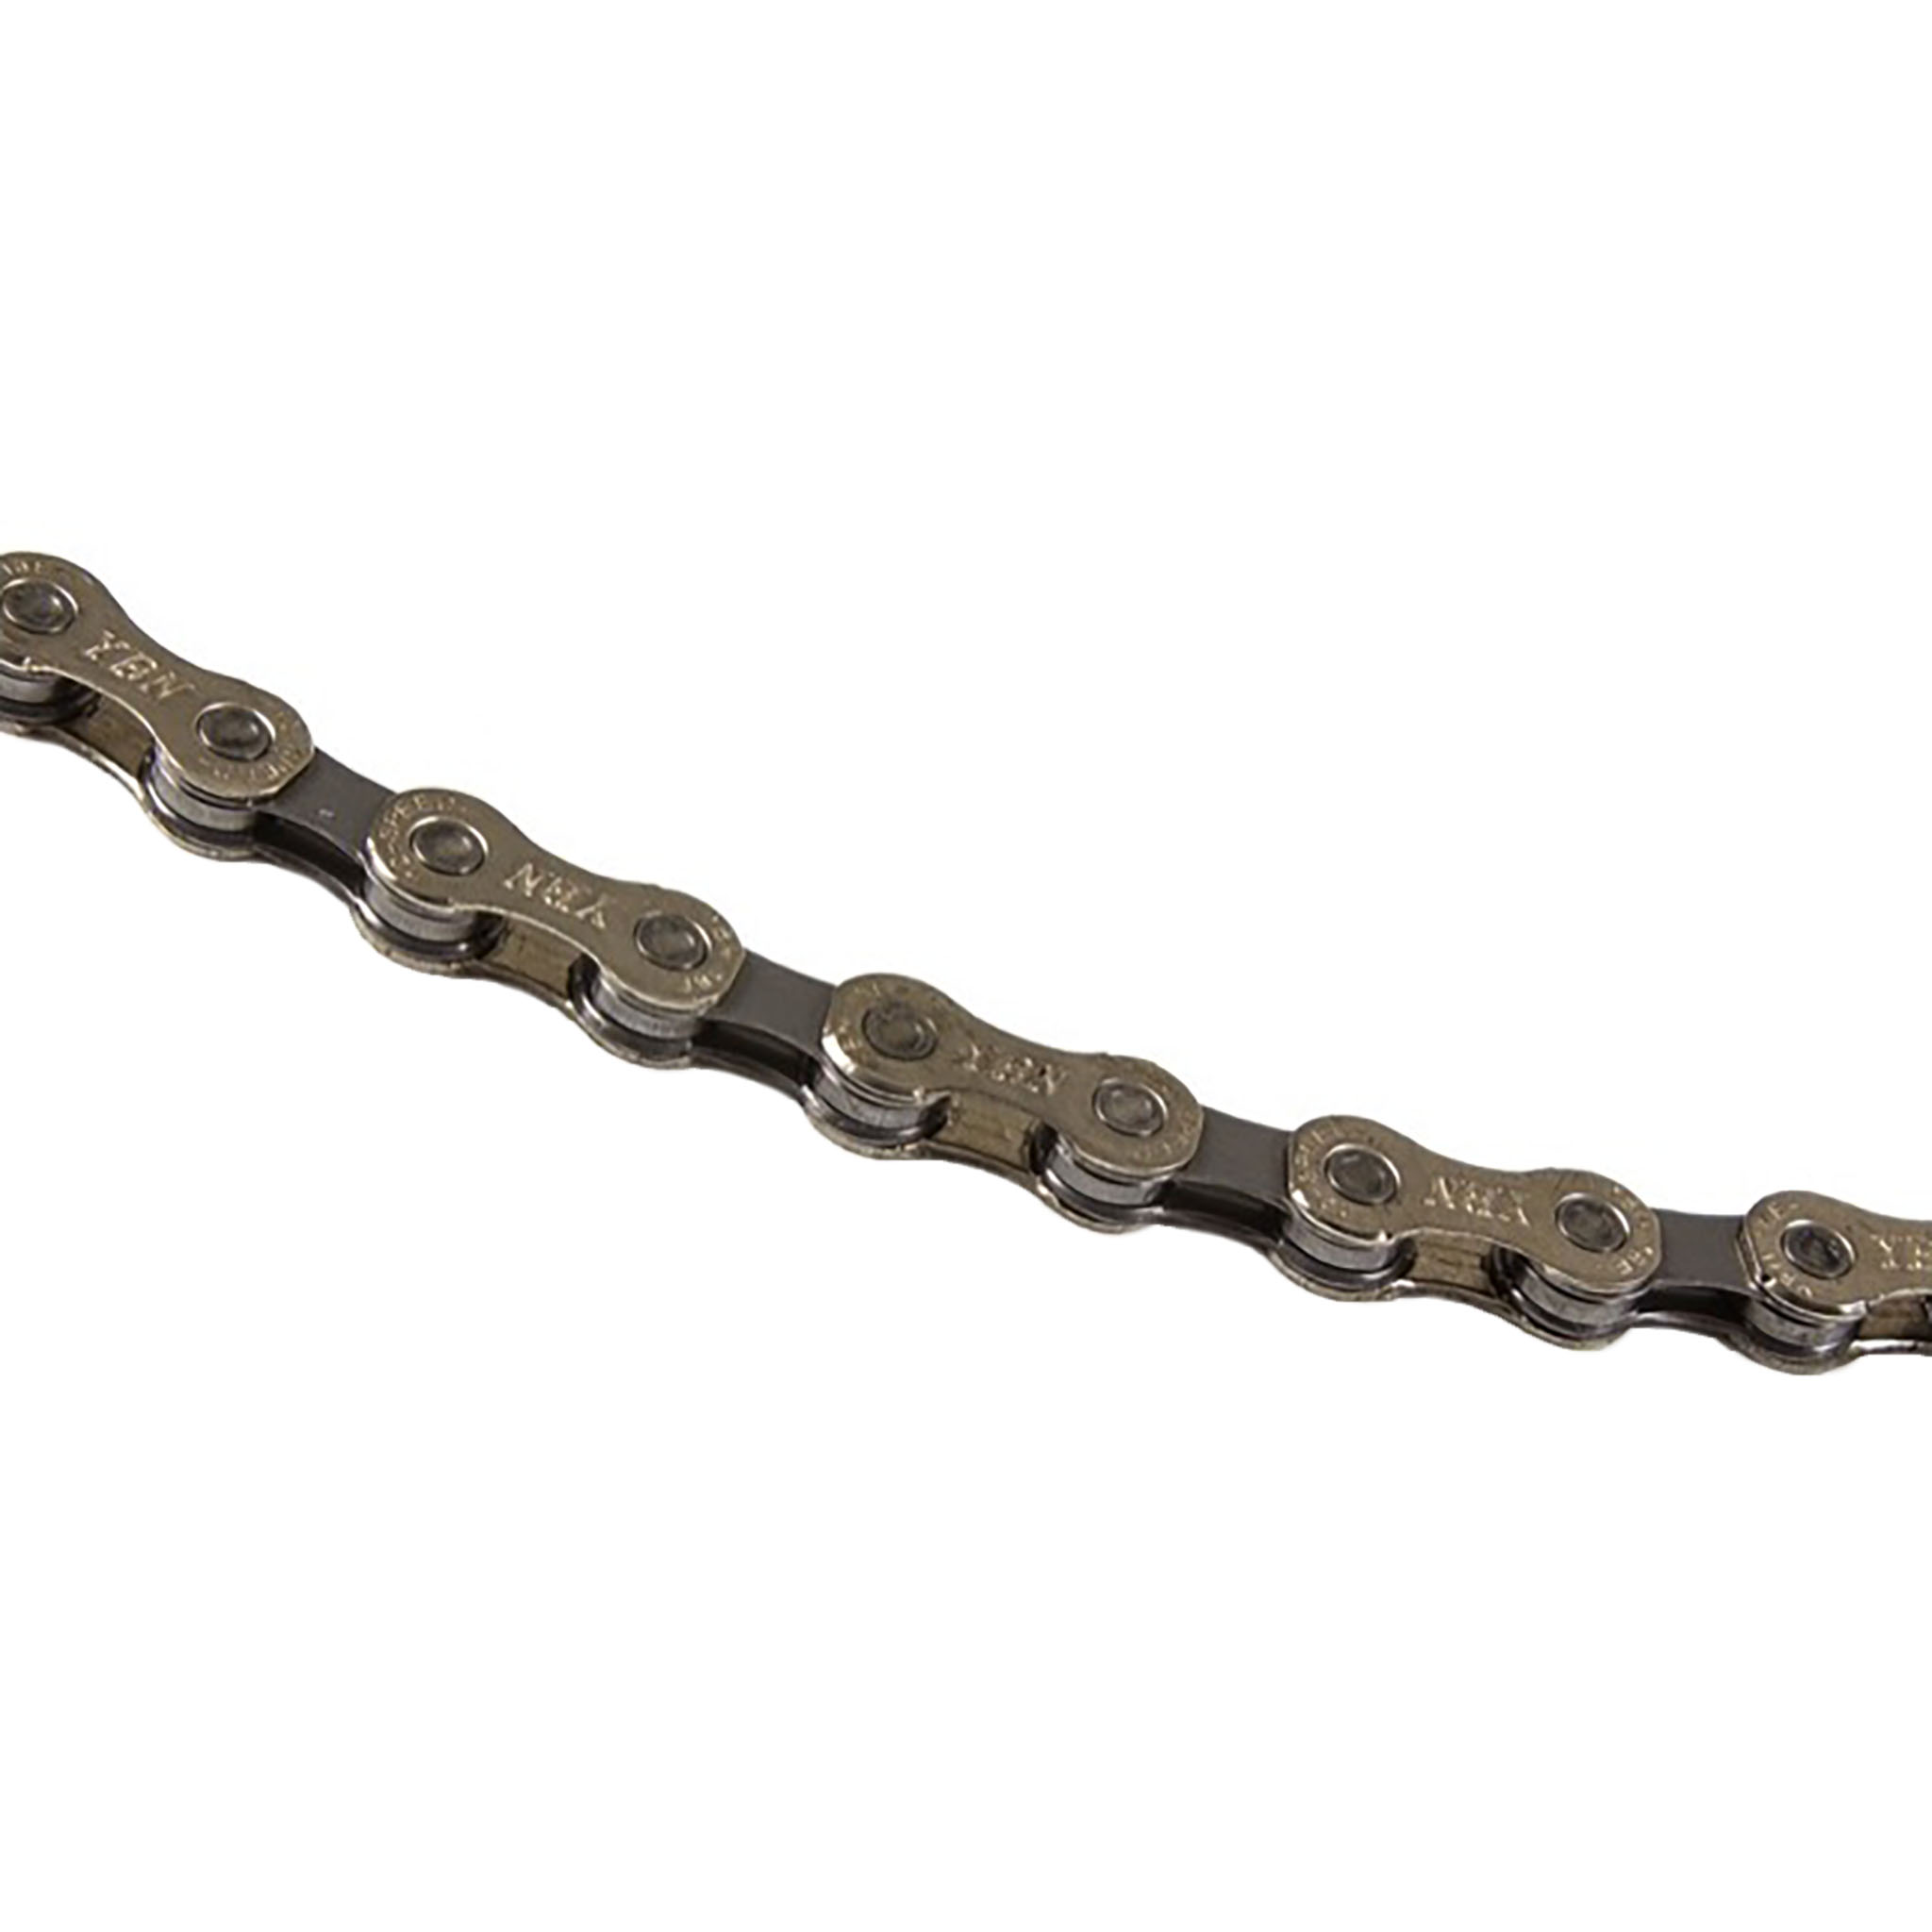 Clarks C12 12sp Chain, Silver 